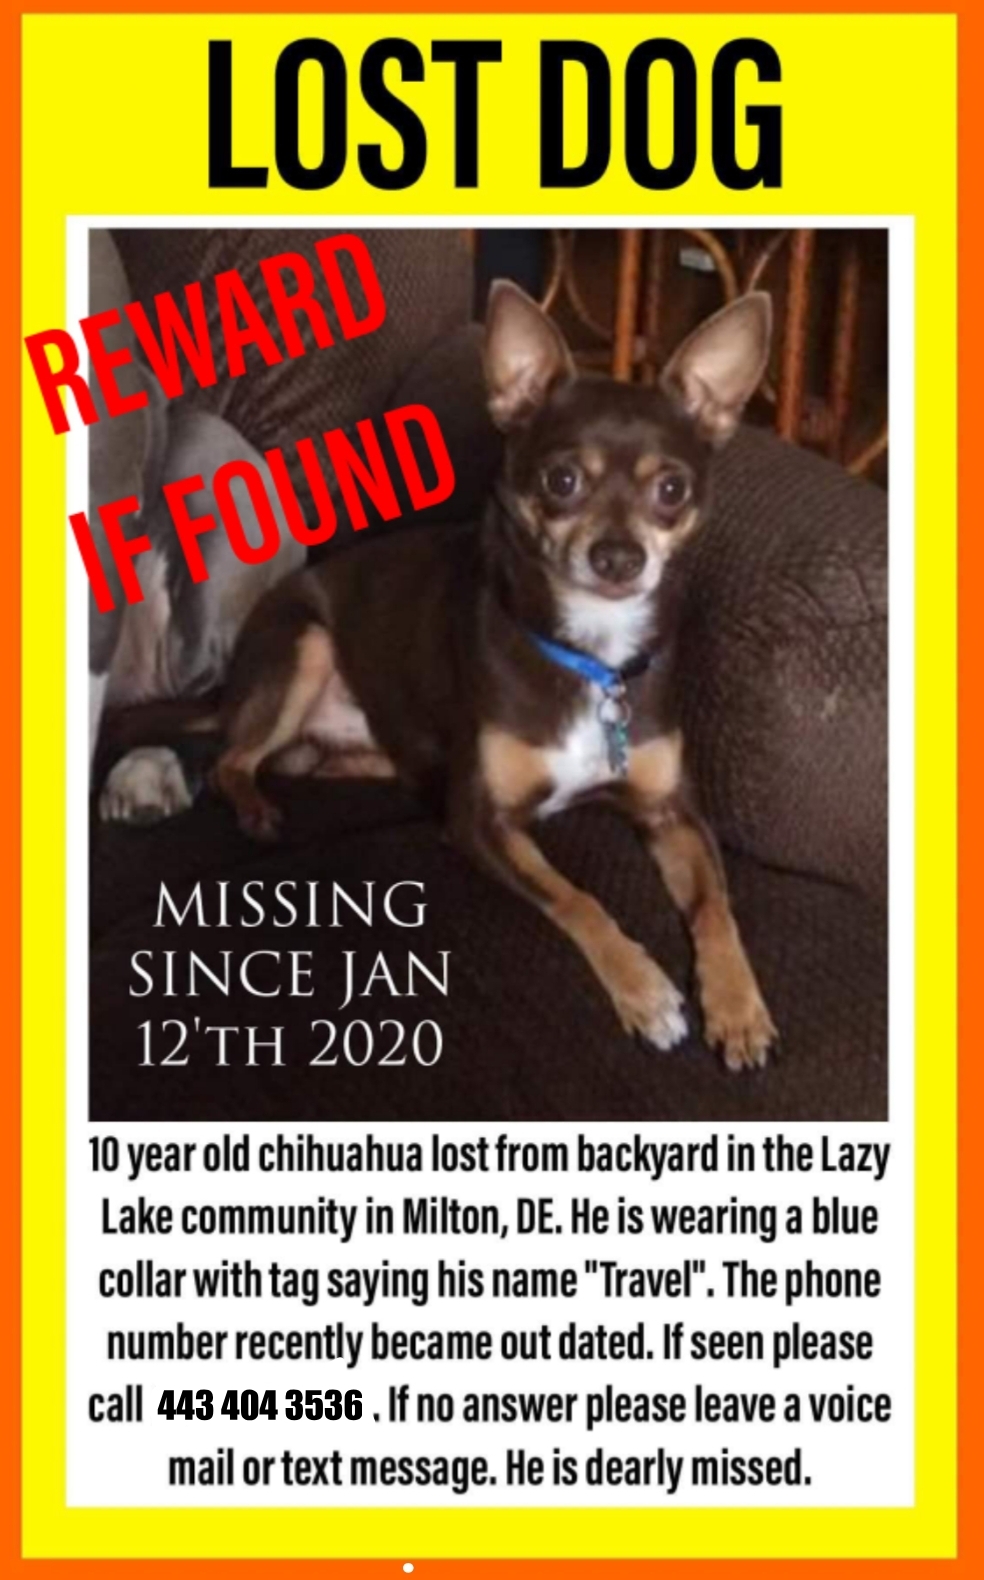 Image of Travel, Lost Dog